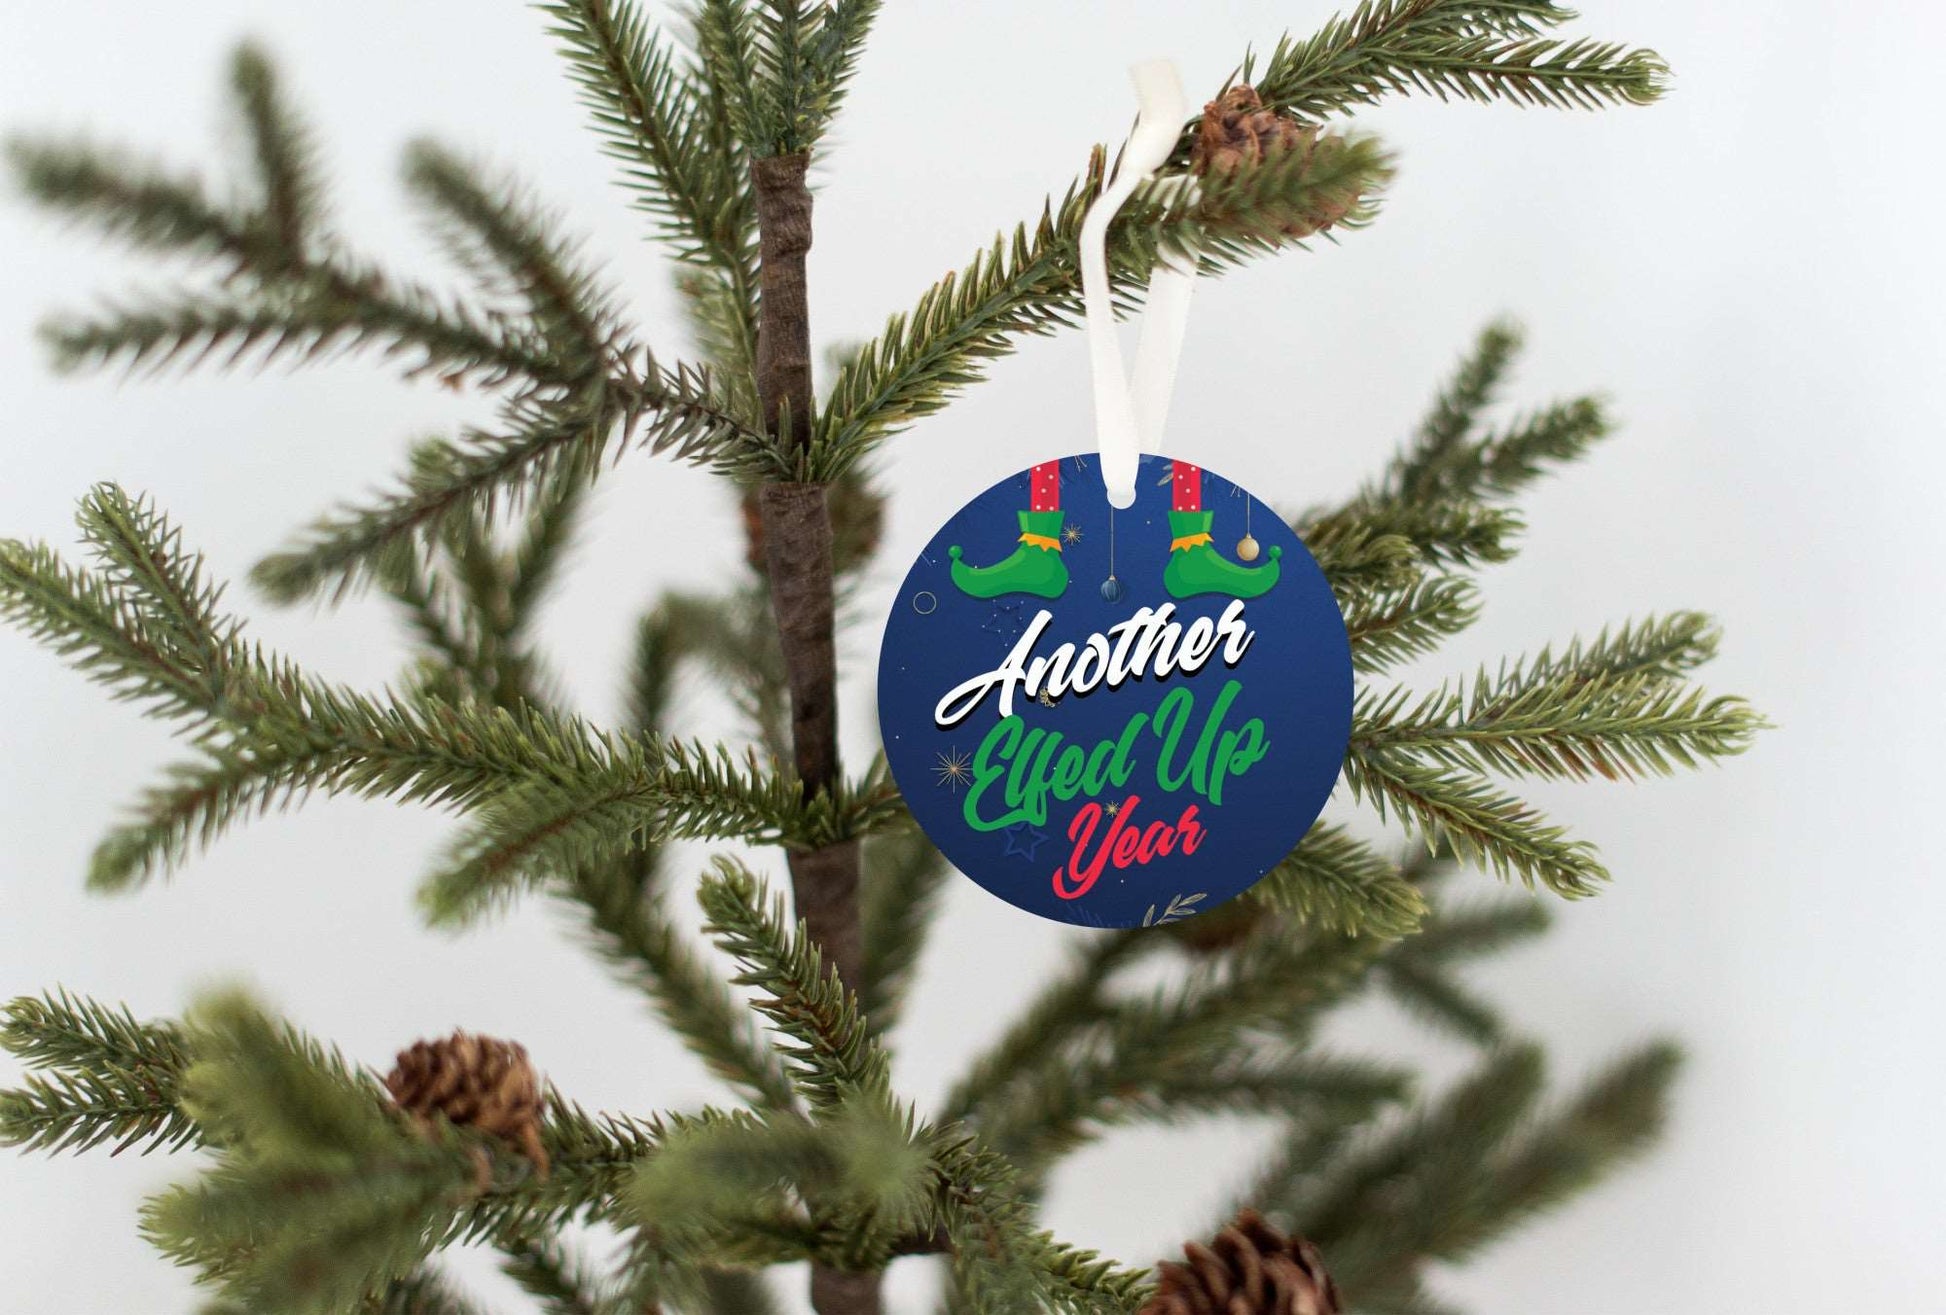 Another Elfed Up Year Christmas Ornament | Thoughtful & Humbly Christmas Ornament Gift